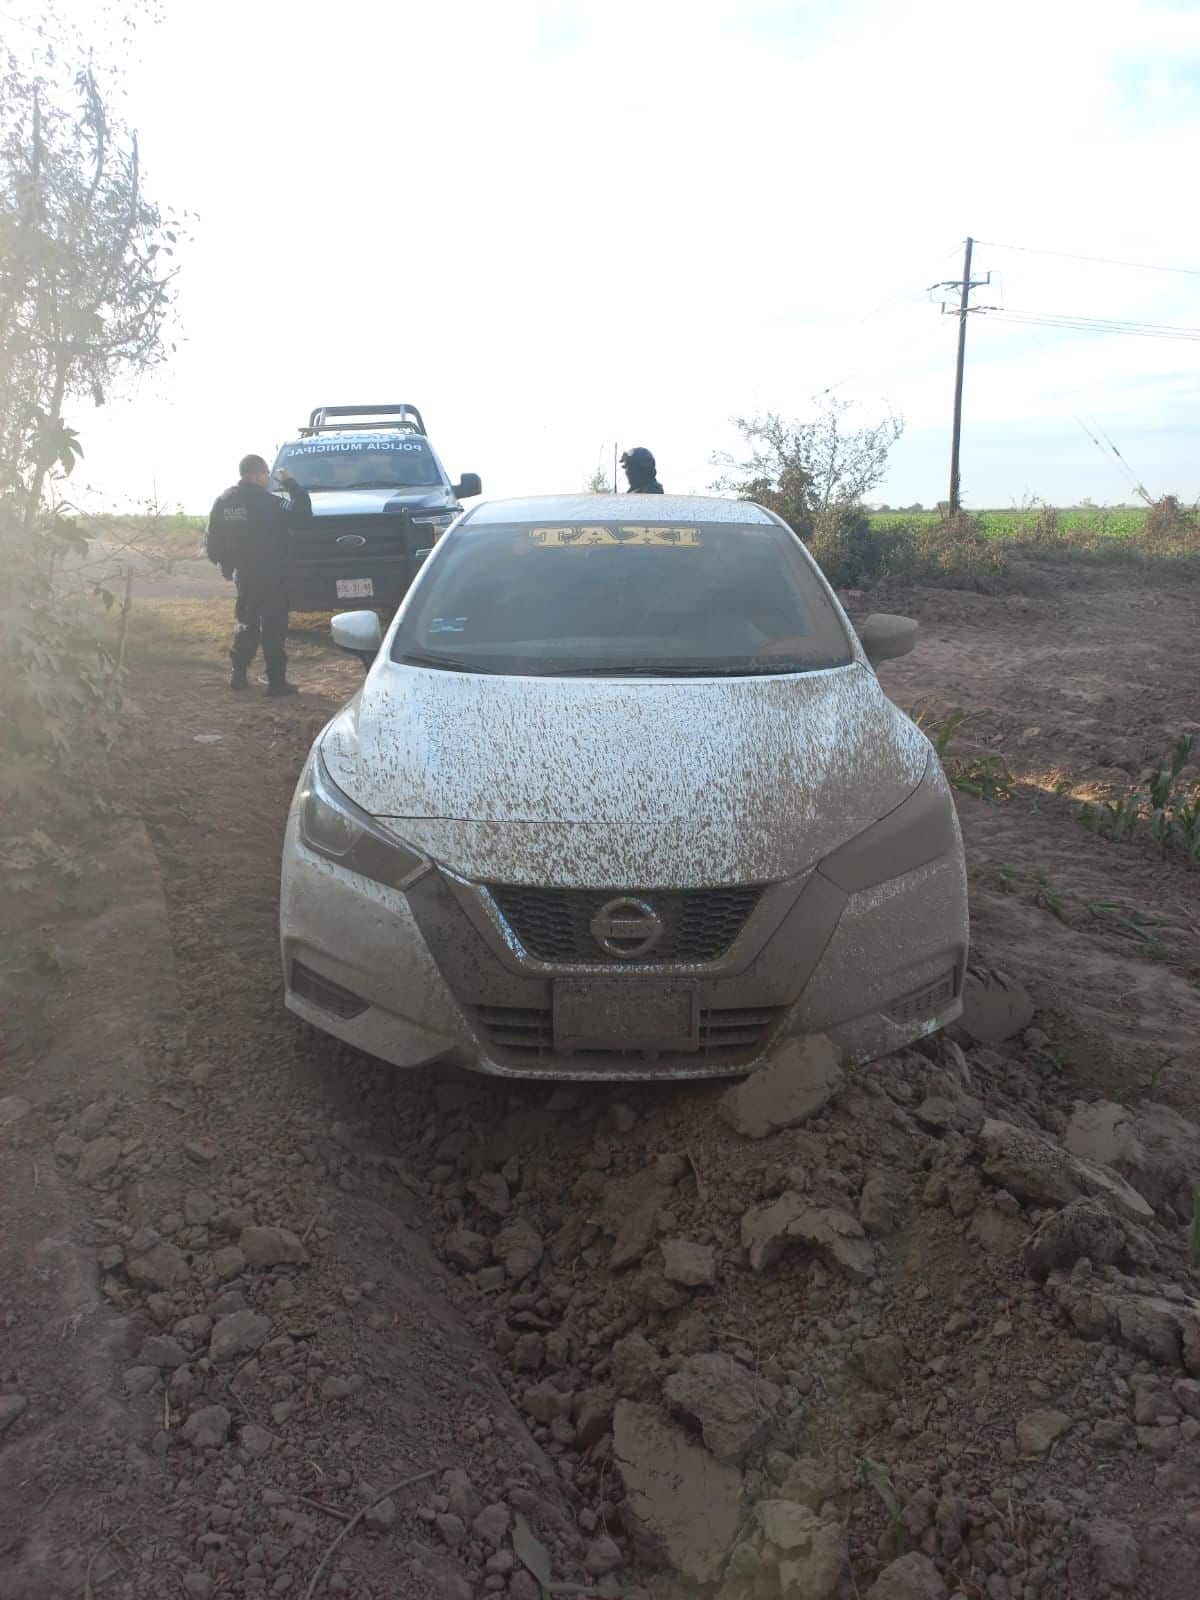 After A Tough Fight, The Municipal Police Recovered A Car In Navolato, Which Had Been Dumped